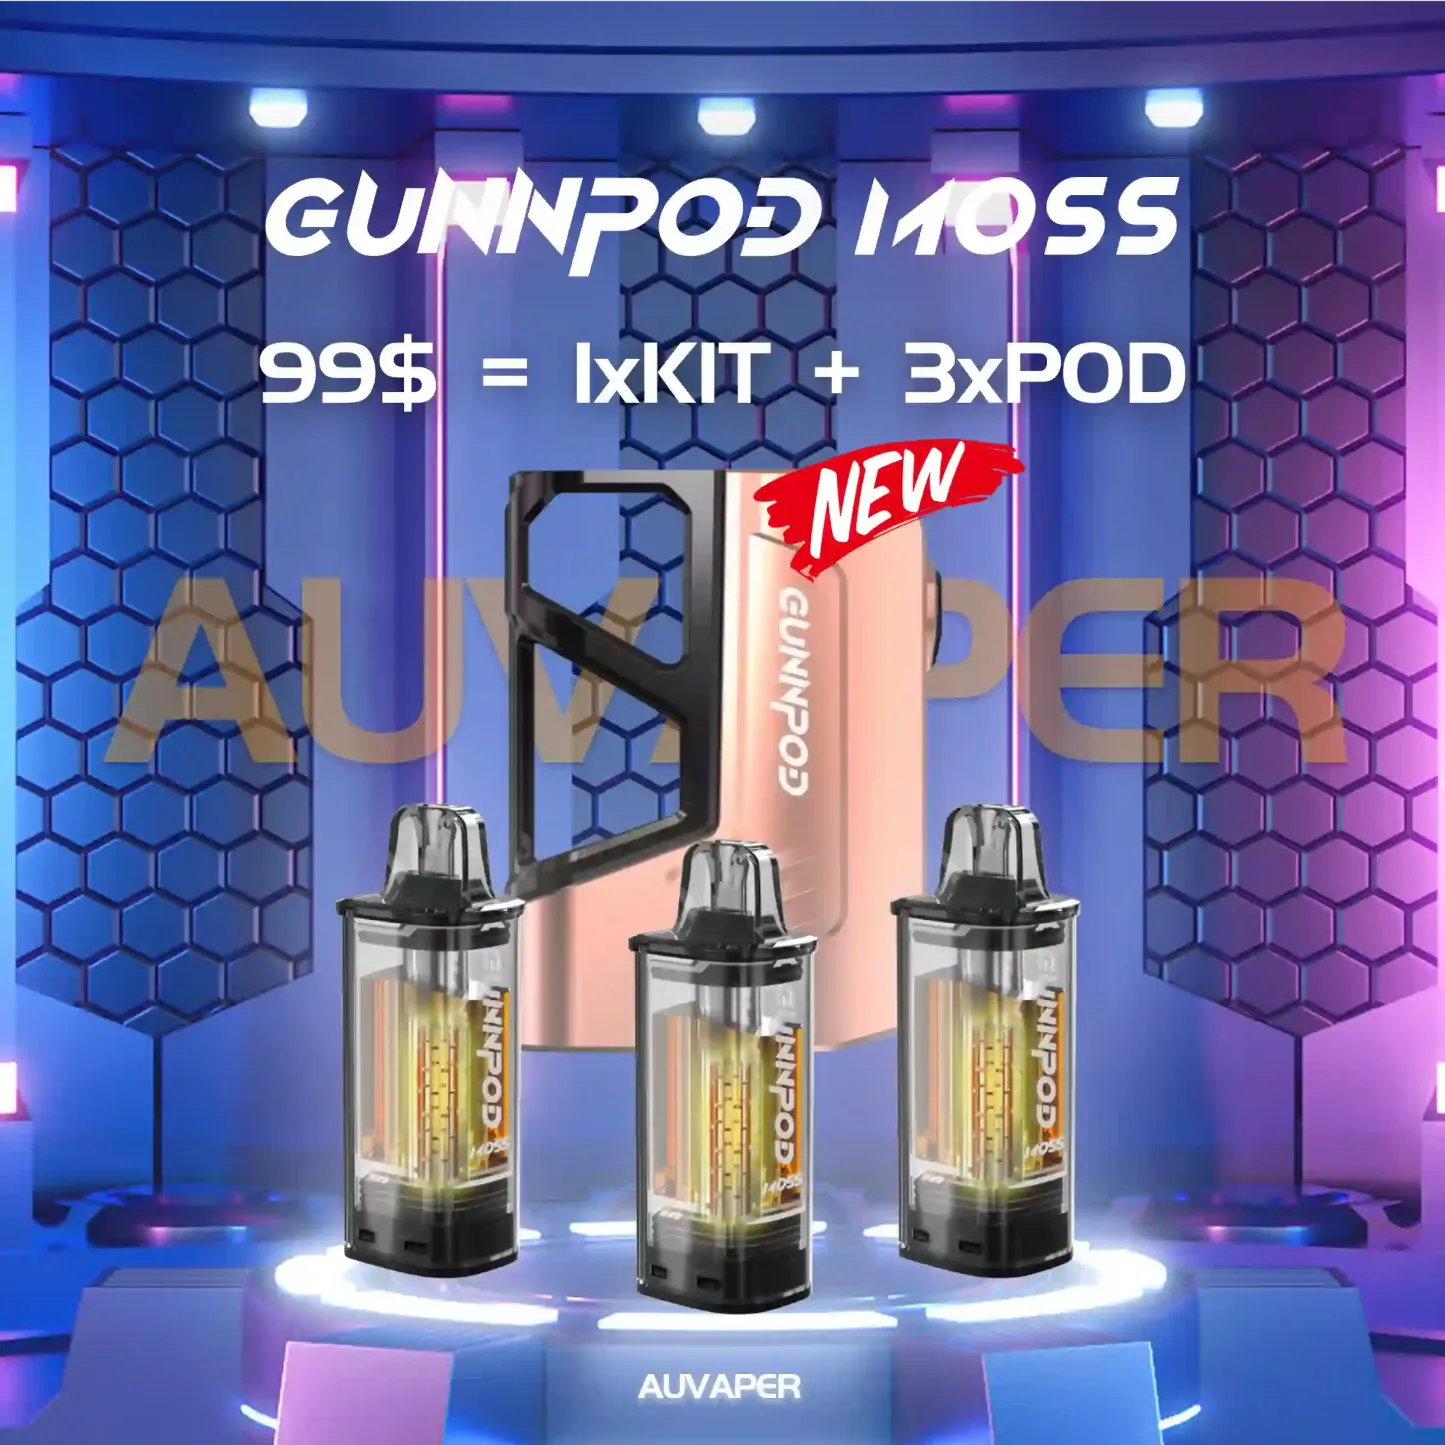  NEW GUNNPOD MOSS Limited Edition Packages：1kit+3POD